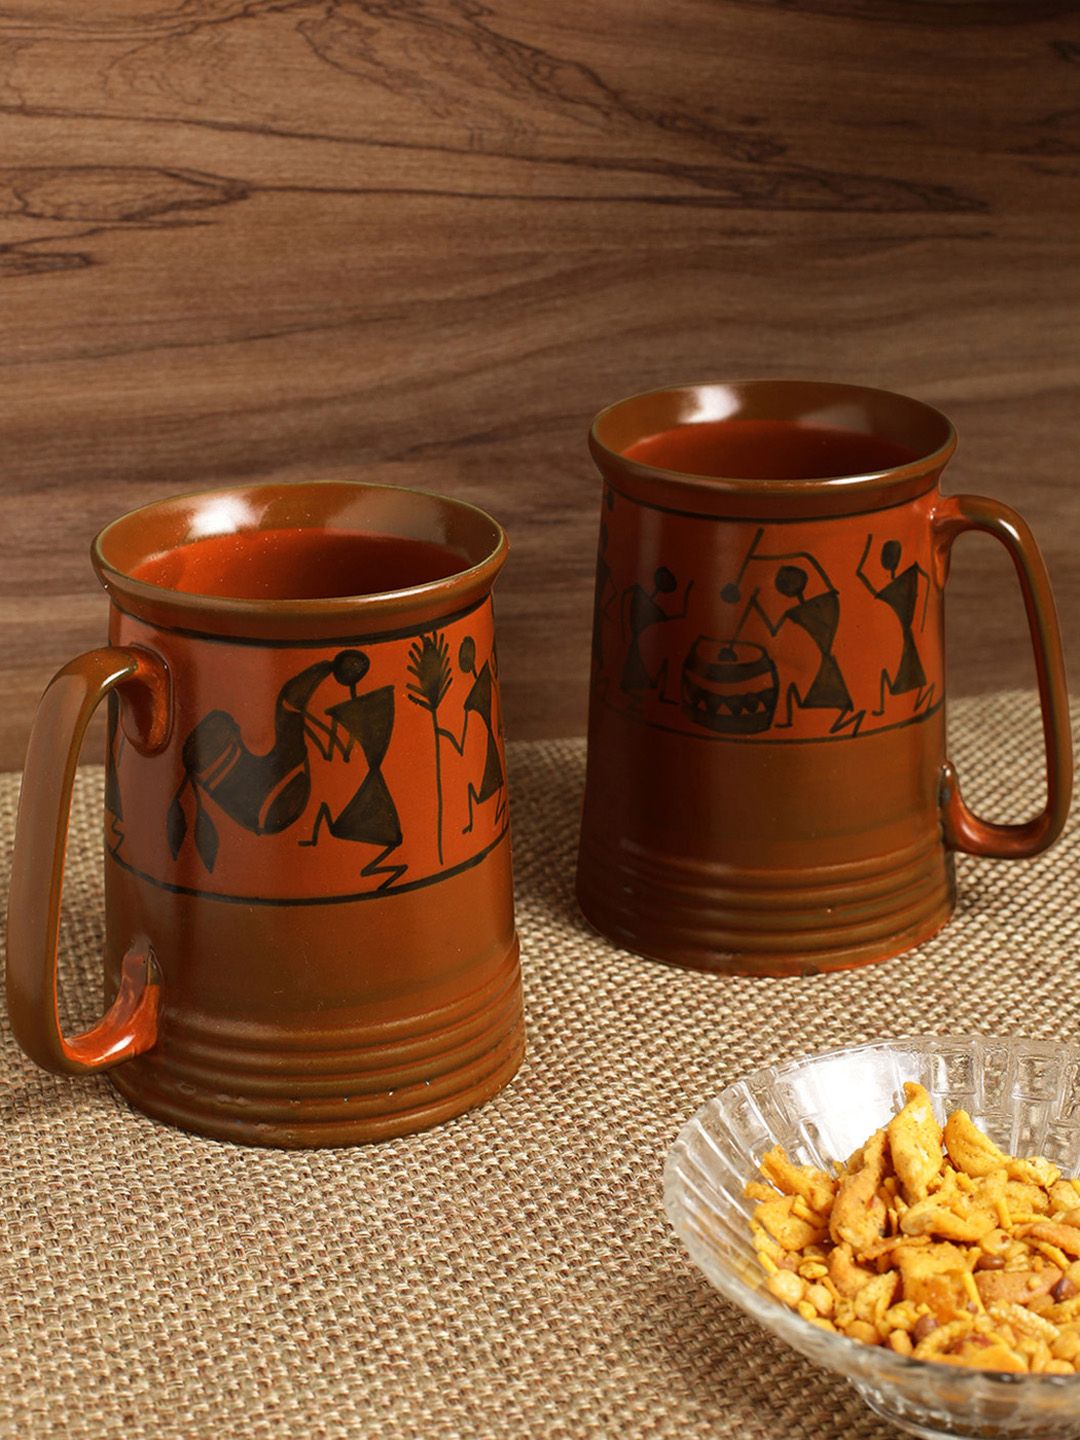 ExclusiveLane 'Two To Tango' Warli Hand-Painted Beer Glasses In Ceramic (Set Of 2) Price in India